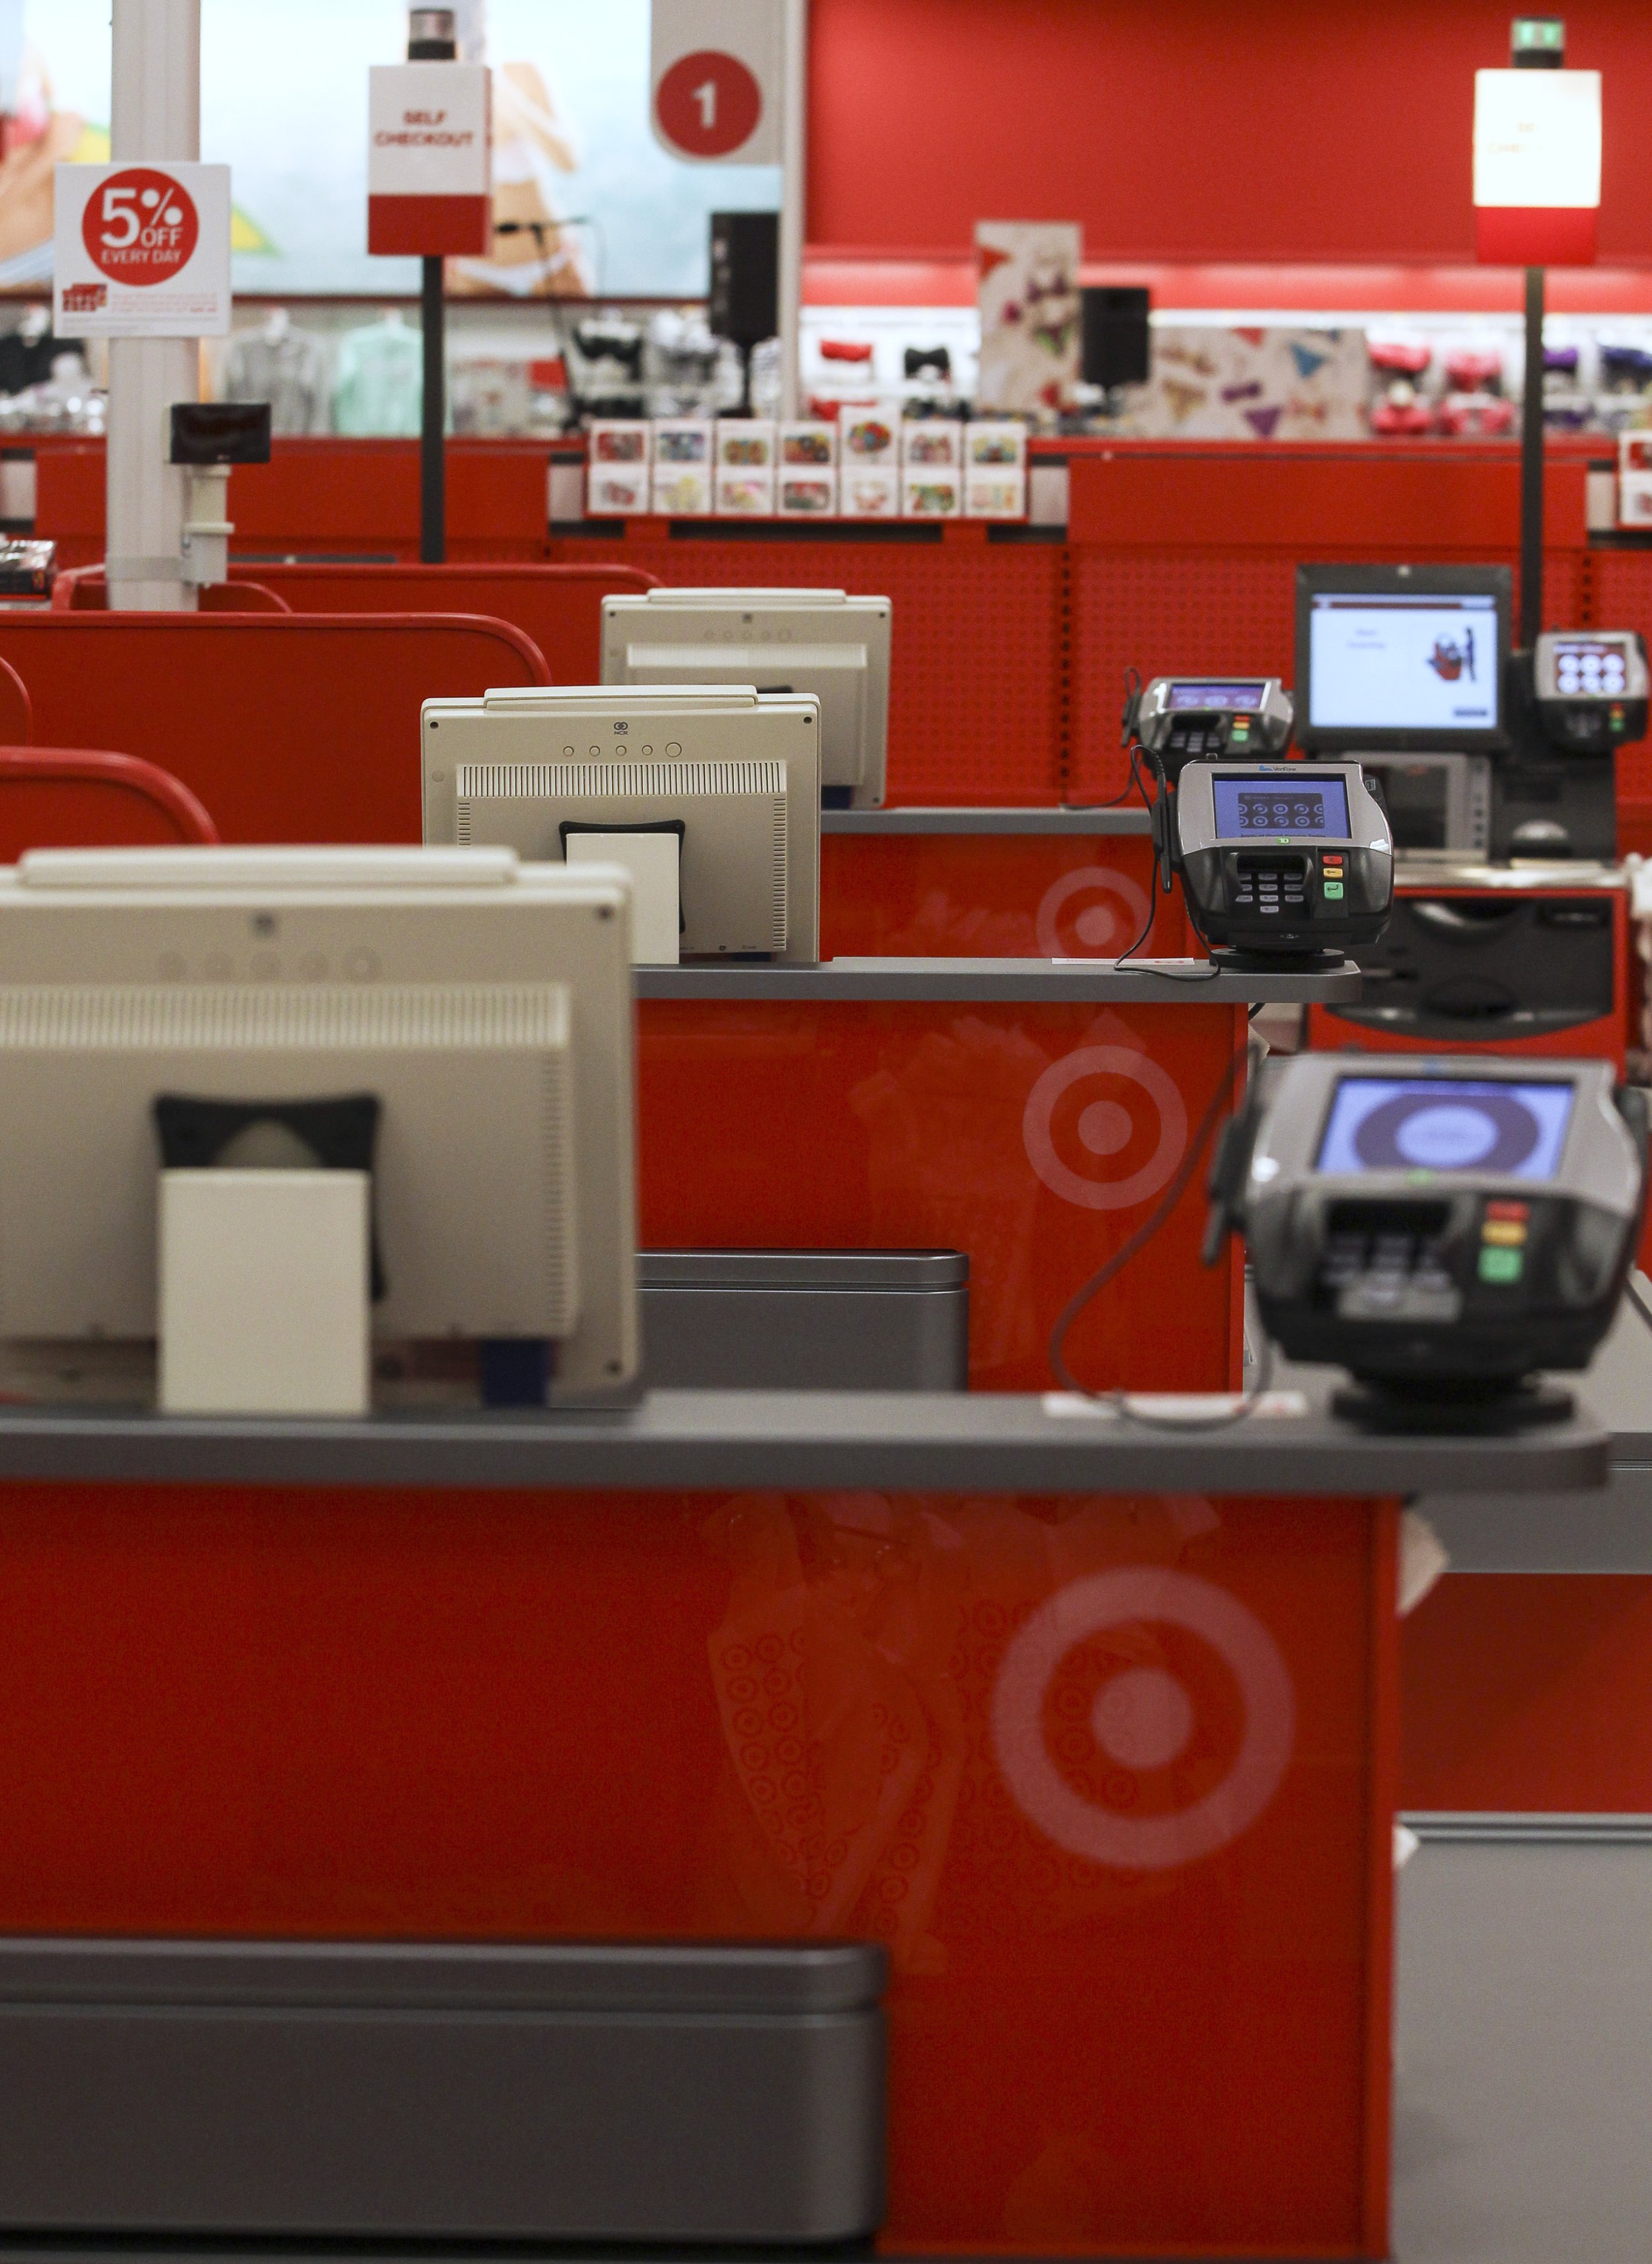 You Used Your Credit Or Debit Card At Target, Now What? How To Check If